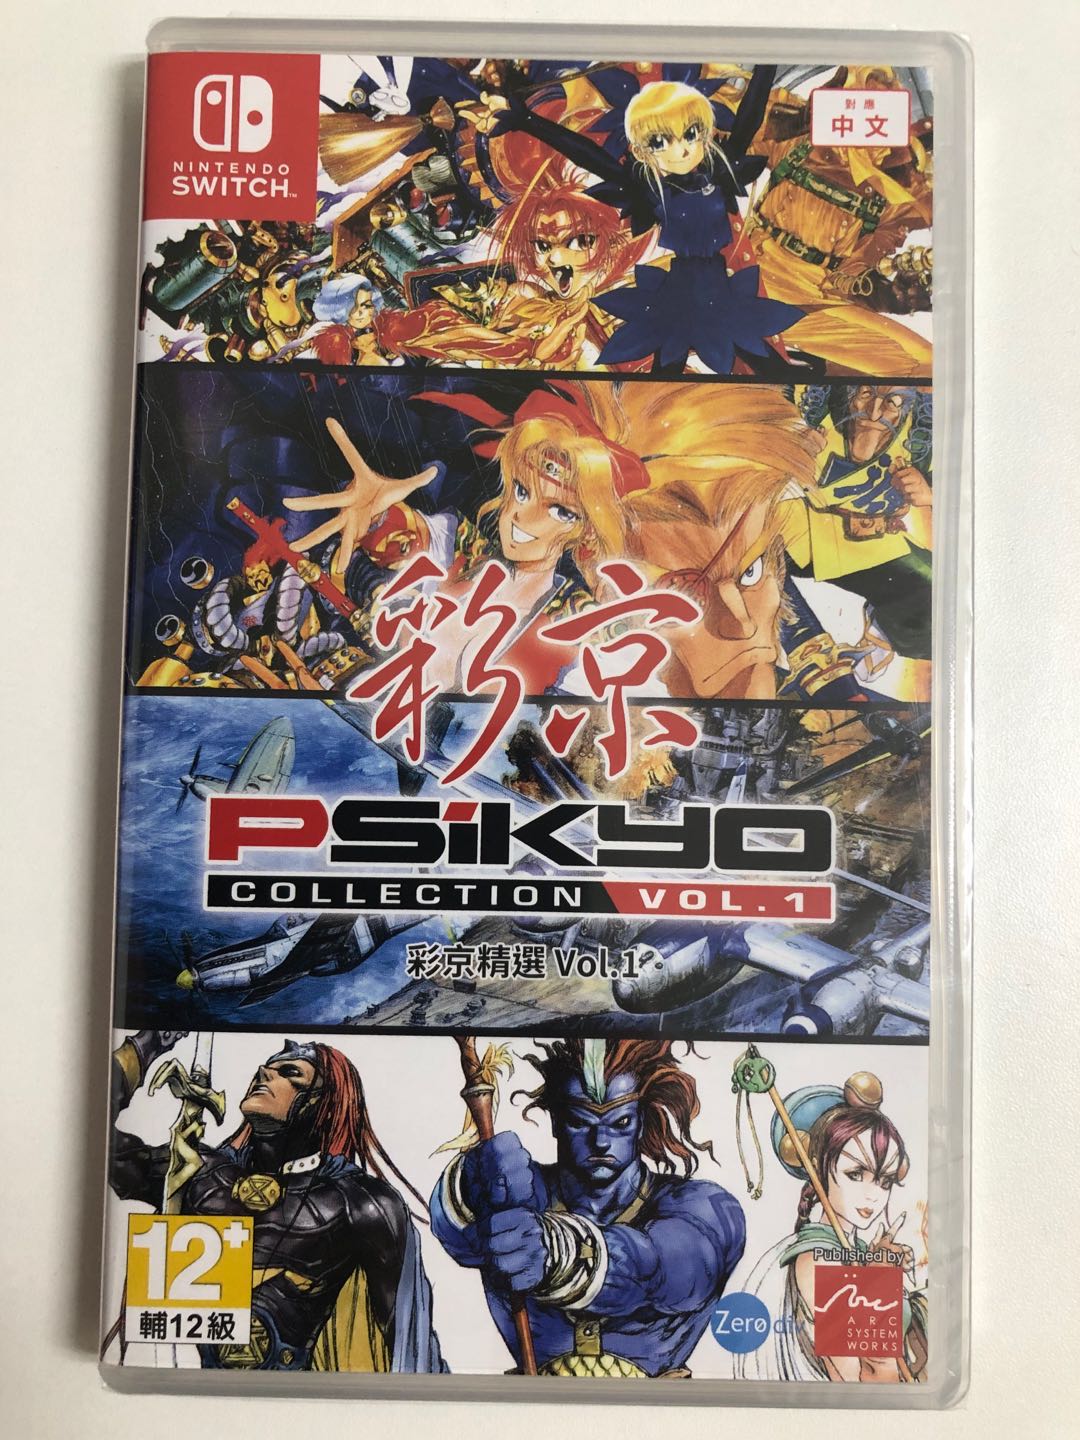 PSIKYO COLLECTION VOL.1 彩京コレクション Vol.1 Japanese・English・Chinese Sub - Switch【新品・通常版・アジア版】